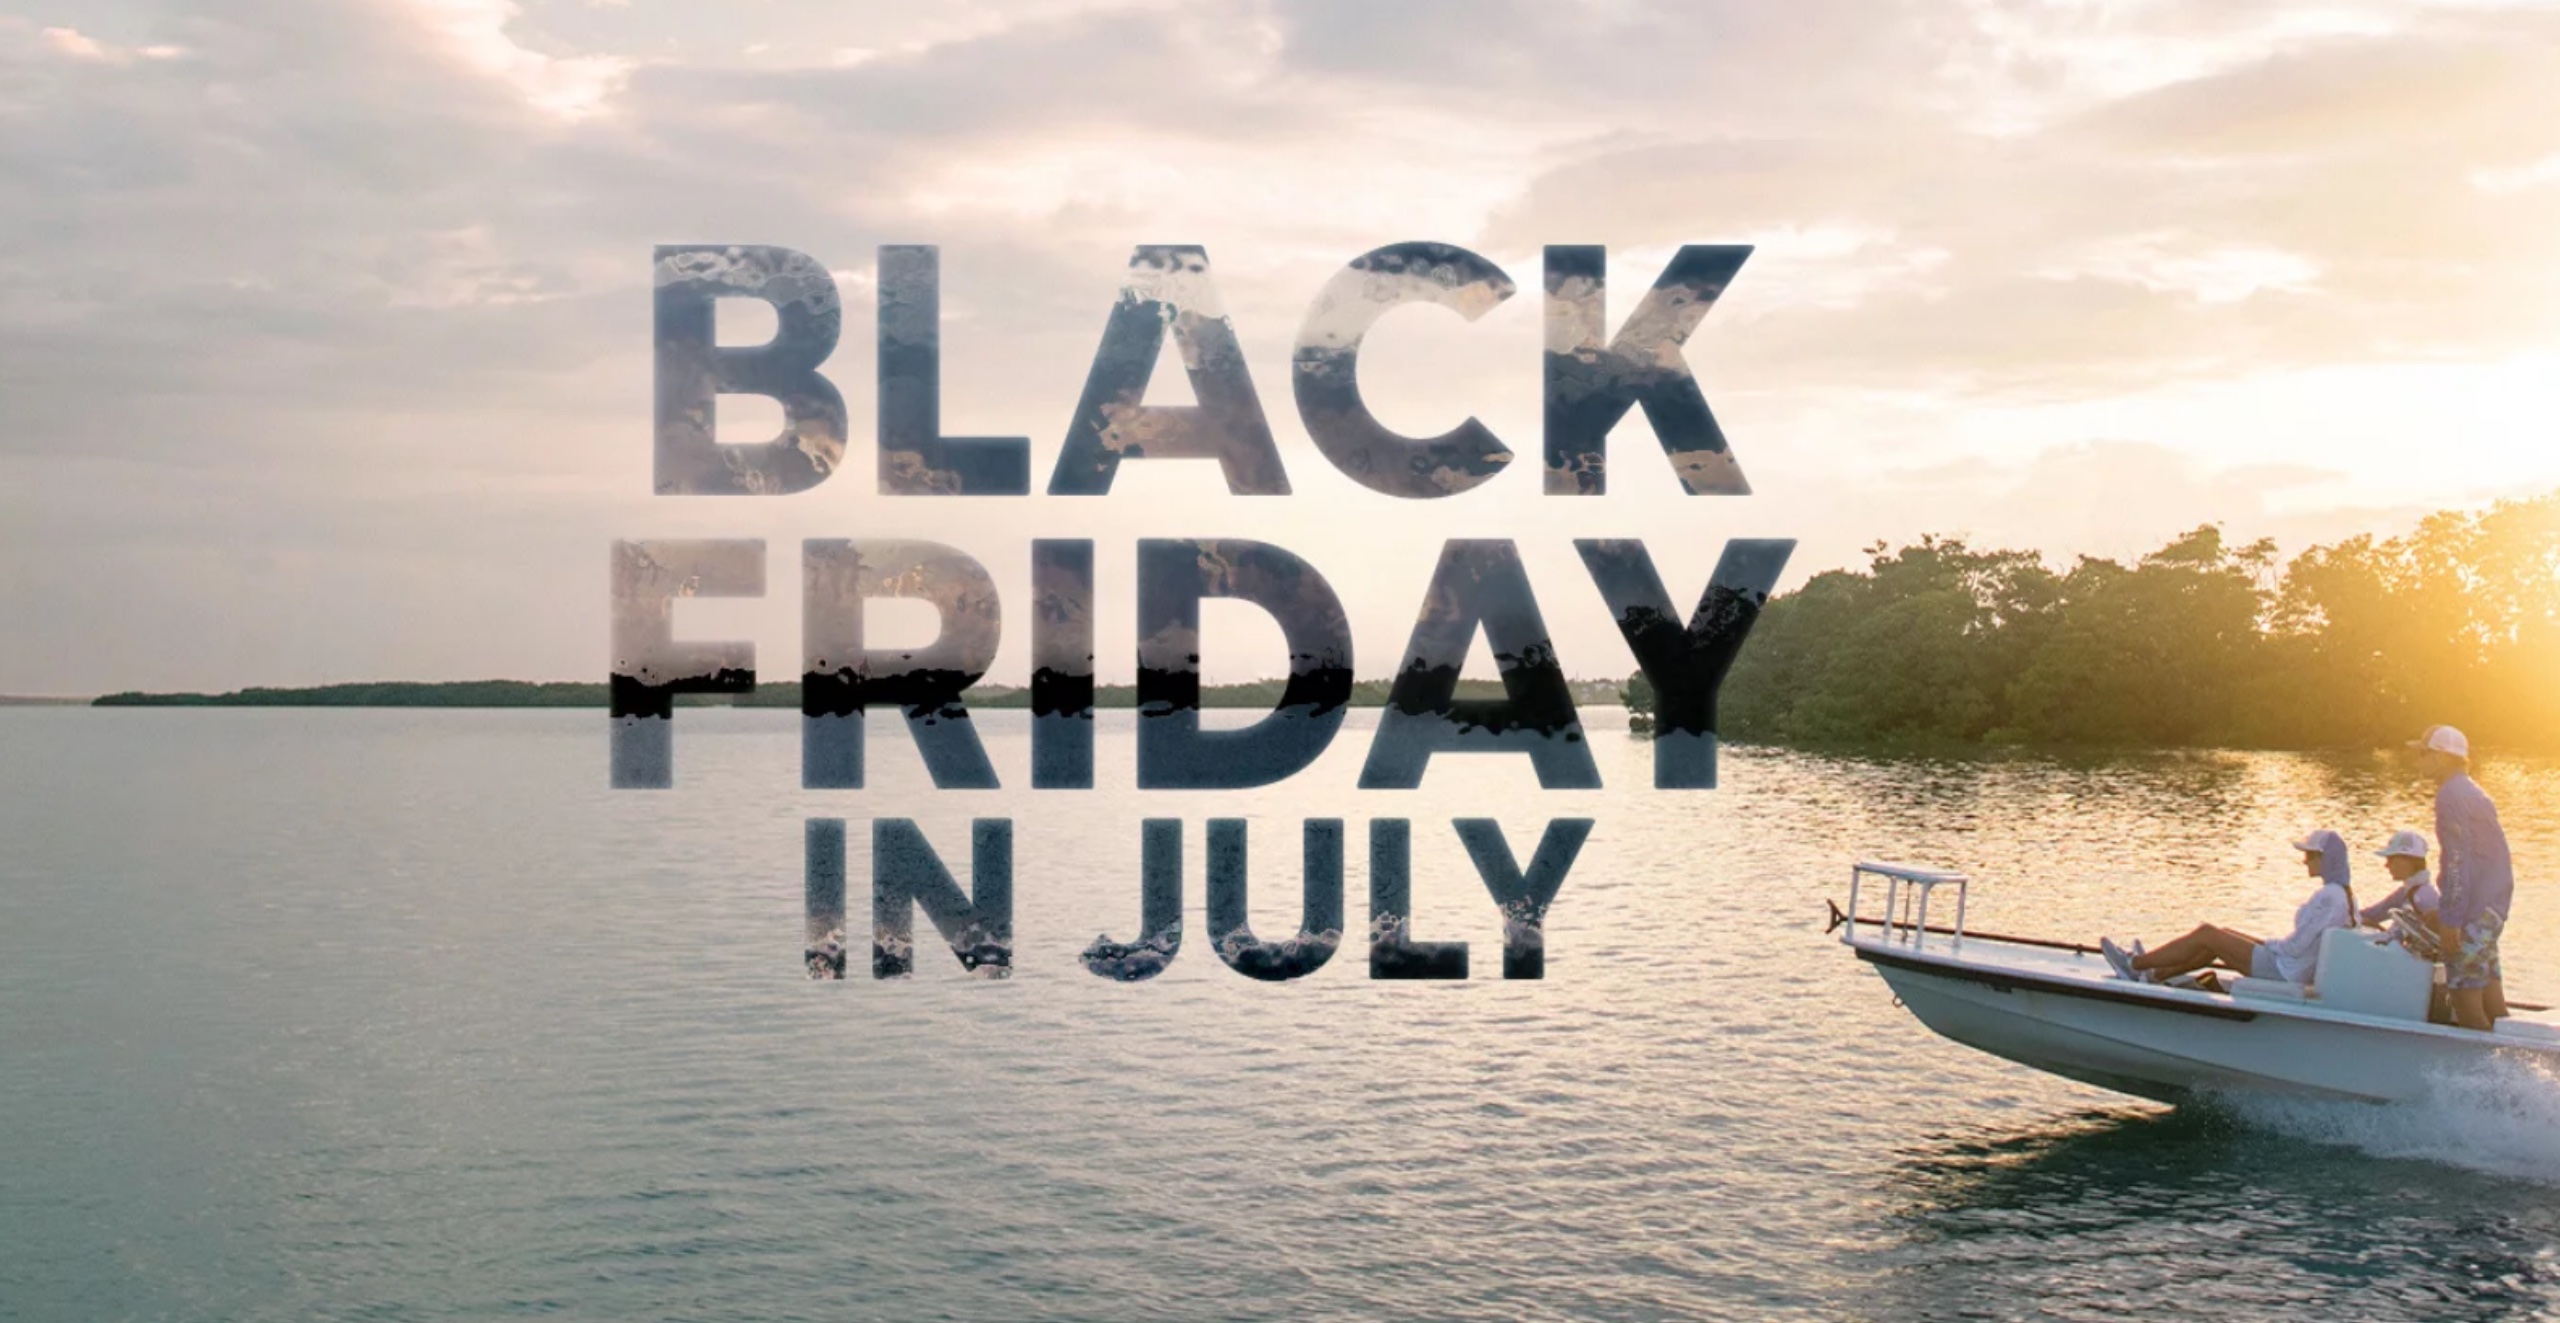 Columbia's Black Friday in July Event offers hundreds of deals from just 8